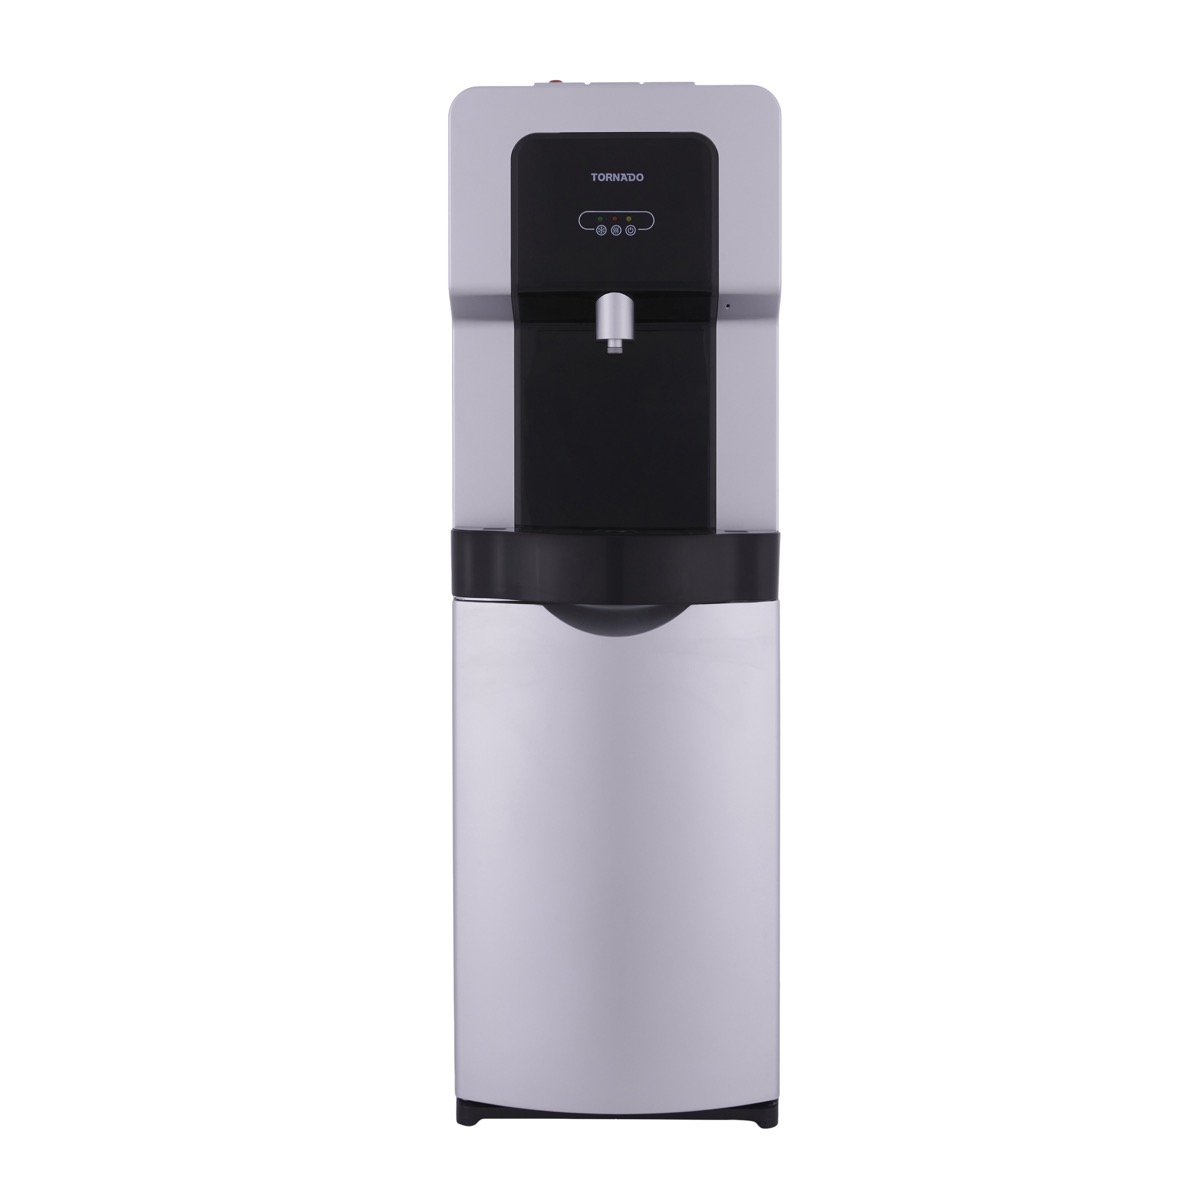 Tornado Hot and Cold Water Dispenser, With Cabinet, Black and Silver - H40ABE-SB